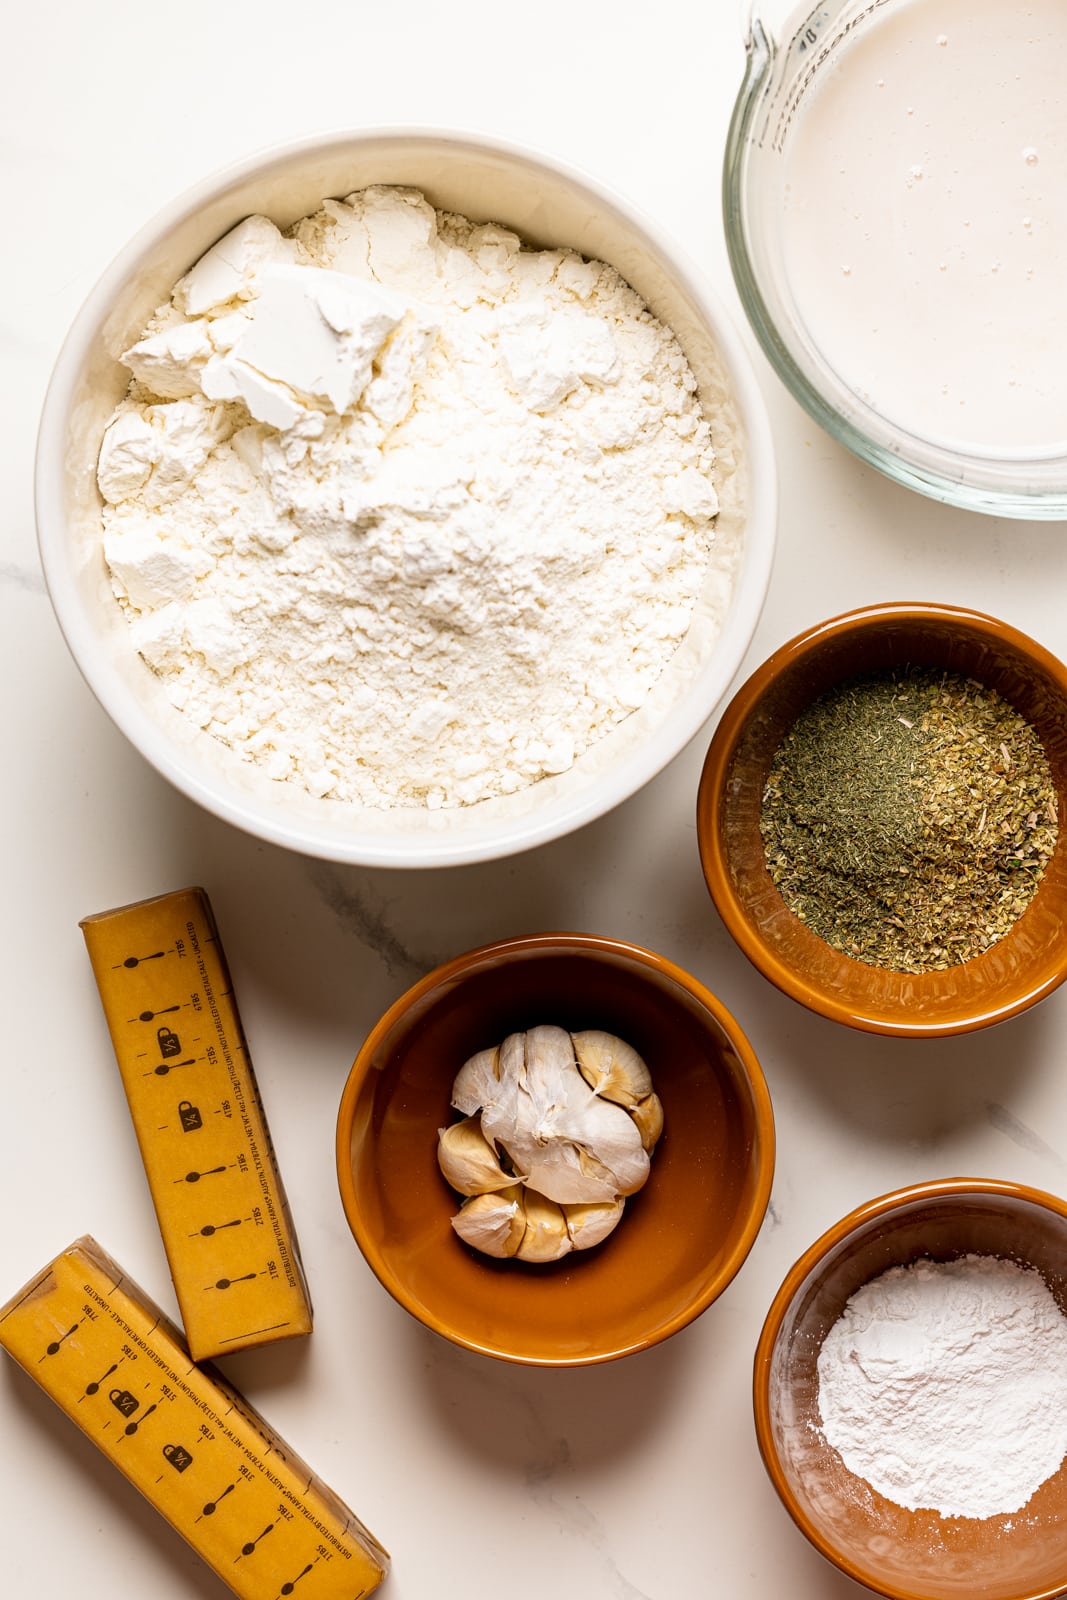 Ingredients on a white table including flour, butter, garlic, herbs + seasonings, milk, and baking powder.